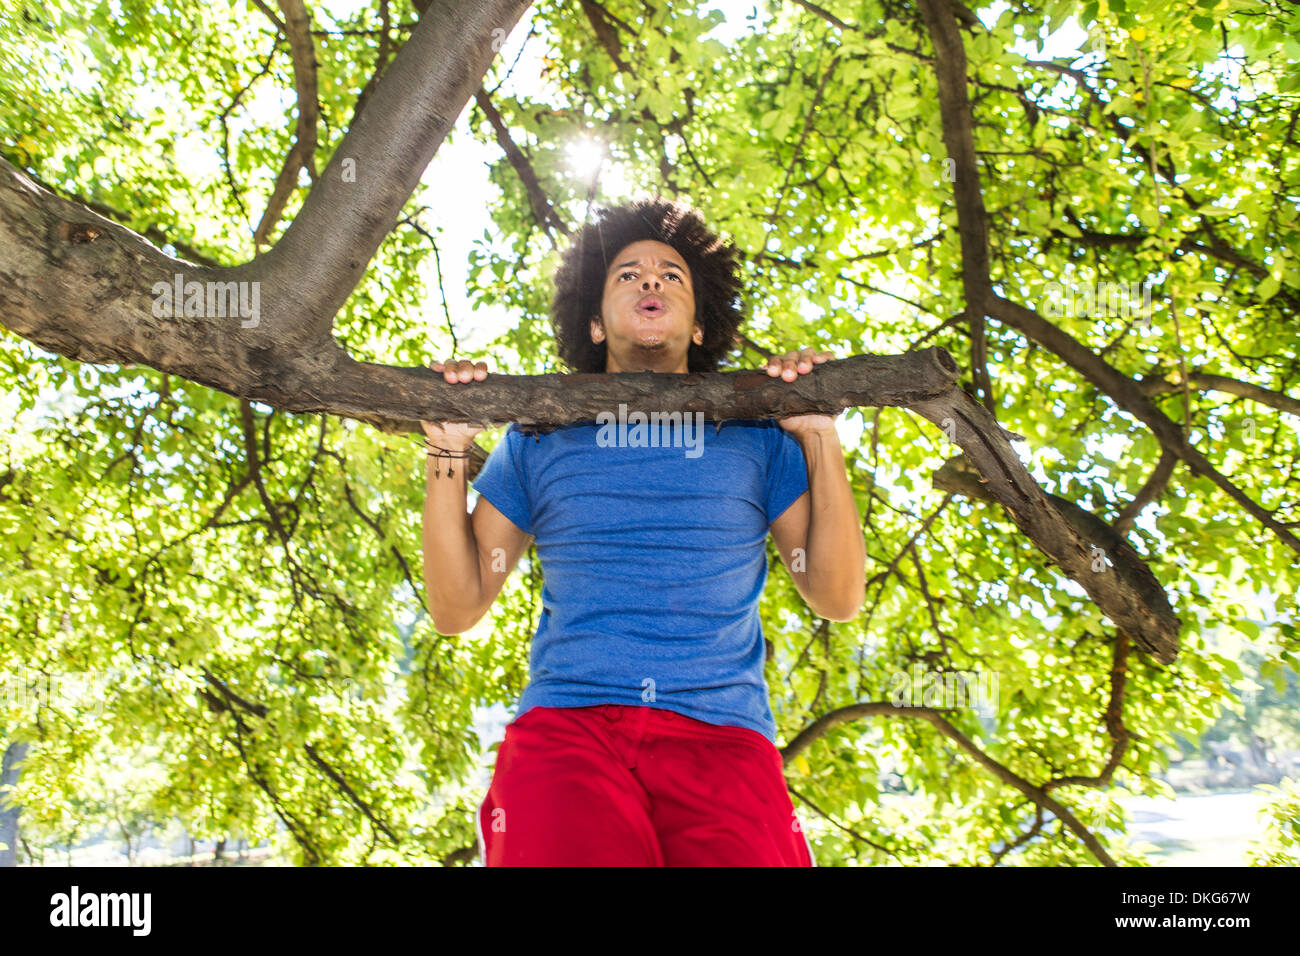 Young man doing chin ups on tree in park Stock Photo